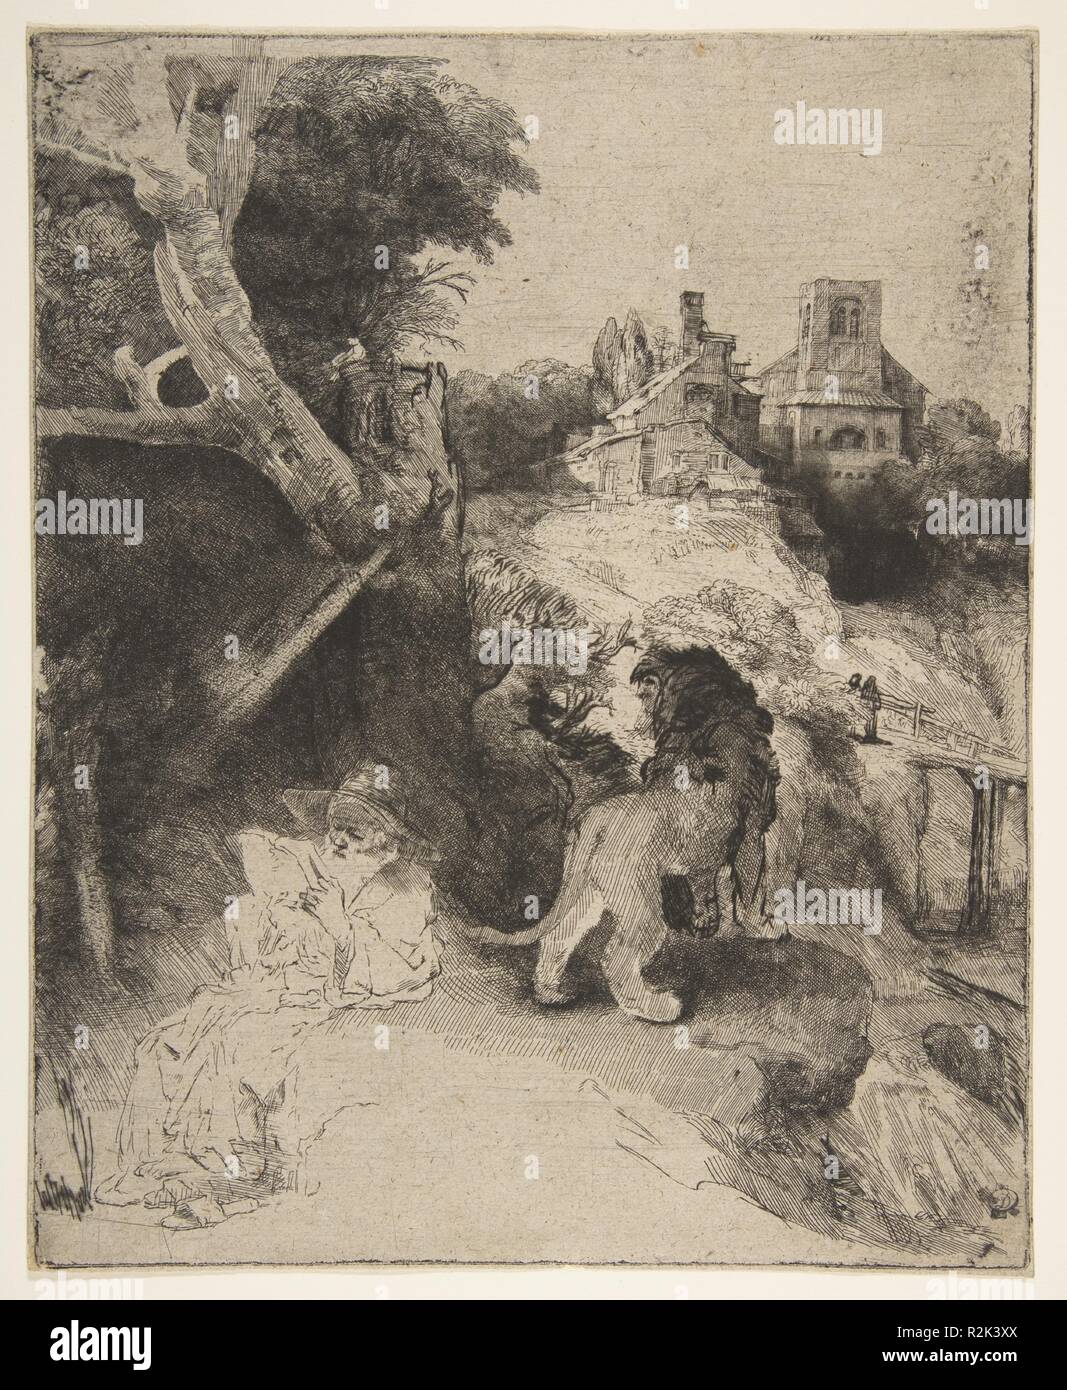 St. Jerome Reading in an Italian Landscape. Artist: Rembrandt (Rembrandt van Rijn) (Dutch, Leiden 1606-1669 Amsterdam). Dimensions: plate: 10 3/16 x 8 1/4 in. (25.9 x 21 cm). Date: ca. 1653.  Rembrandt depicted Saint Jerome many times, here as a contented old man reading. The print reflects Rembrandt's great admiration for Venetian art, particularly in the landscape and buildings in the background, which were inspired by the work of Giulio (ca. 1482-after 1515) and Domenico (1500-1564) Campagnola.  The marked contrast between the briefly sketched saint and the more polished areas of the print  Stock Photo